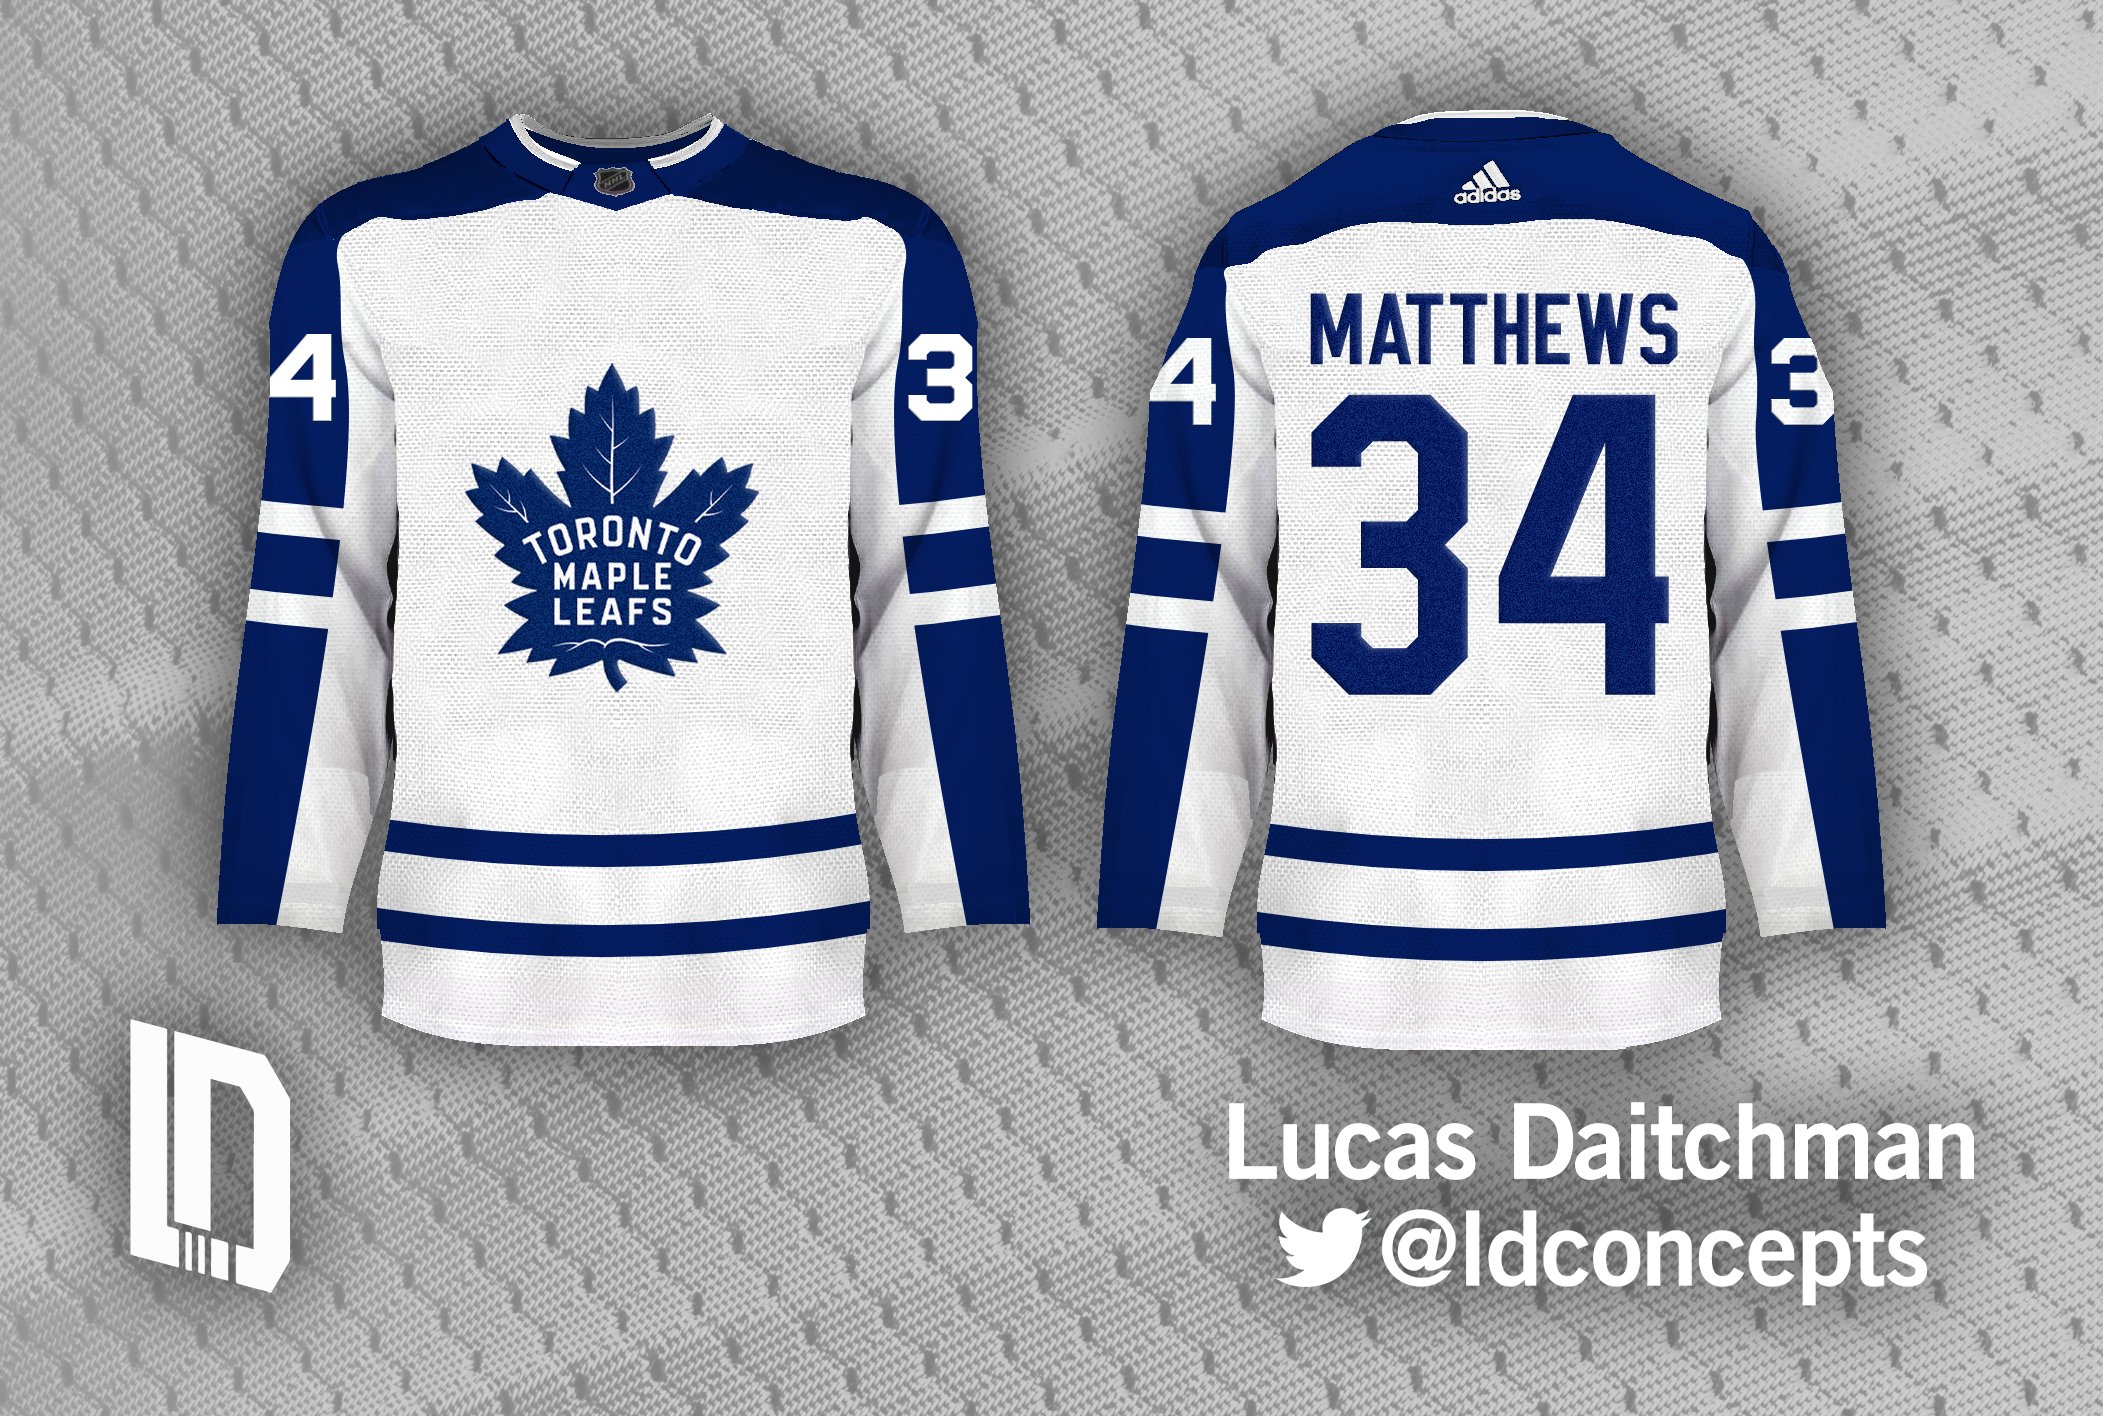 Lucas Daitchman on X: With the 2023 NHL Winter Classic coming back to  Fenway Park next winter, I put together some jersey and logo concepts for  the event. I bring back the